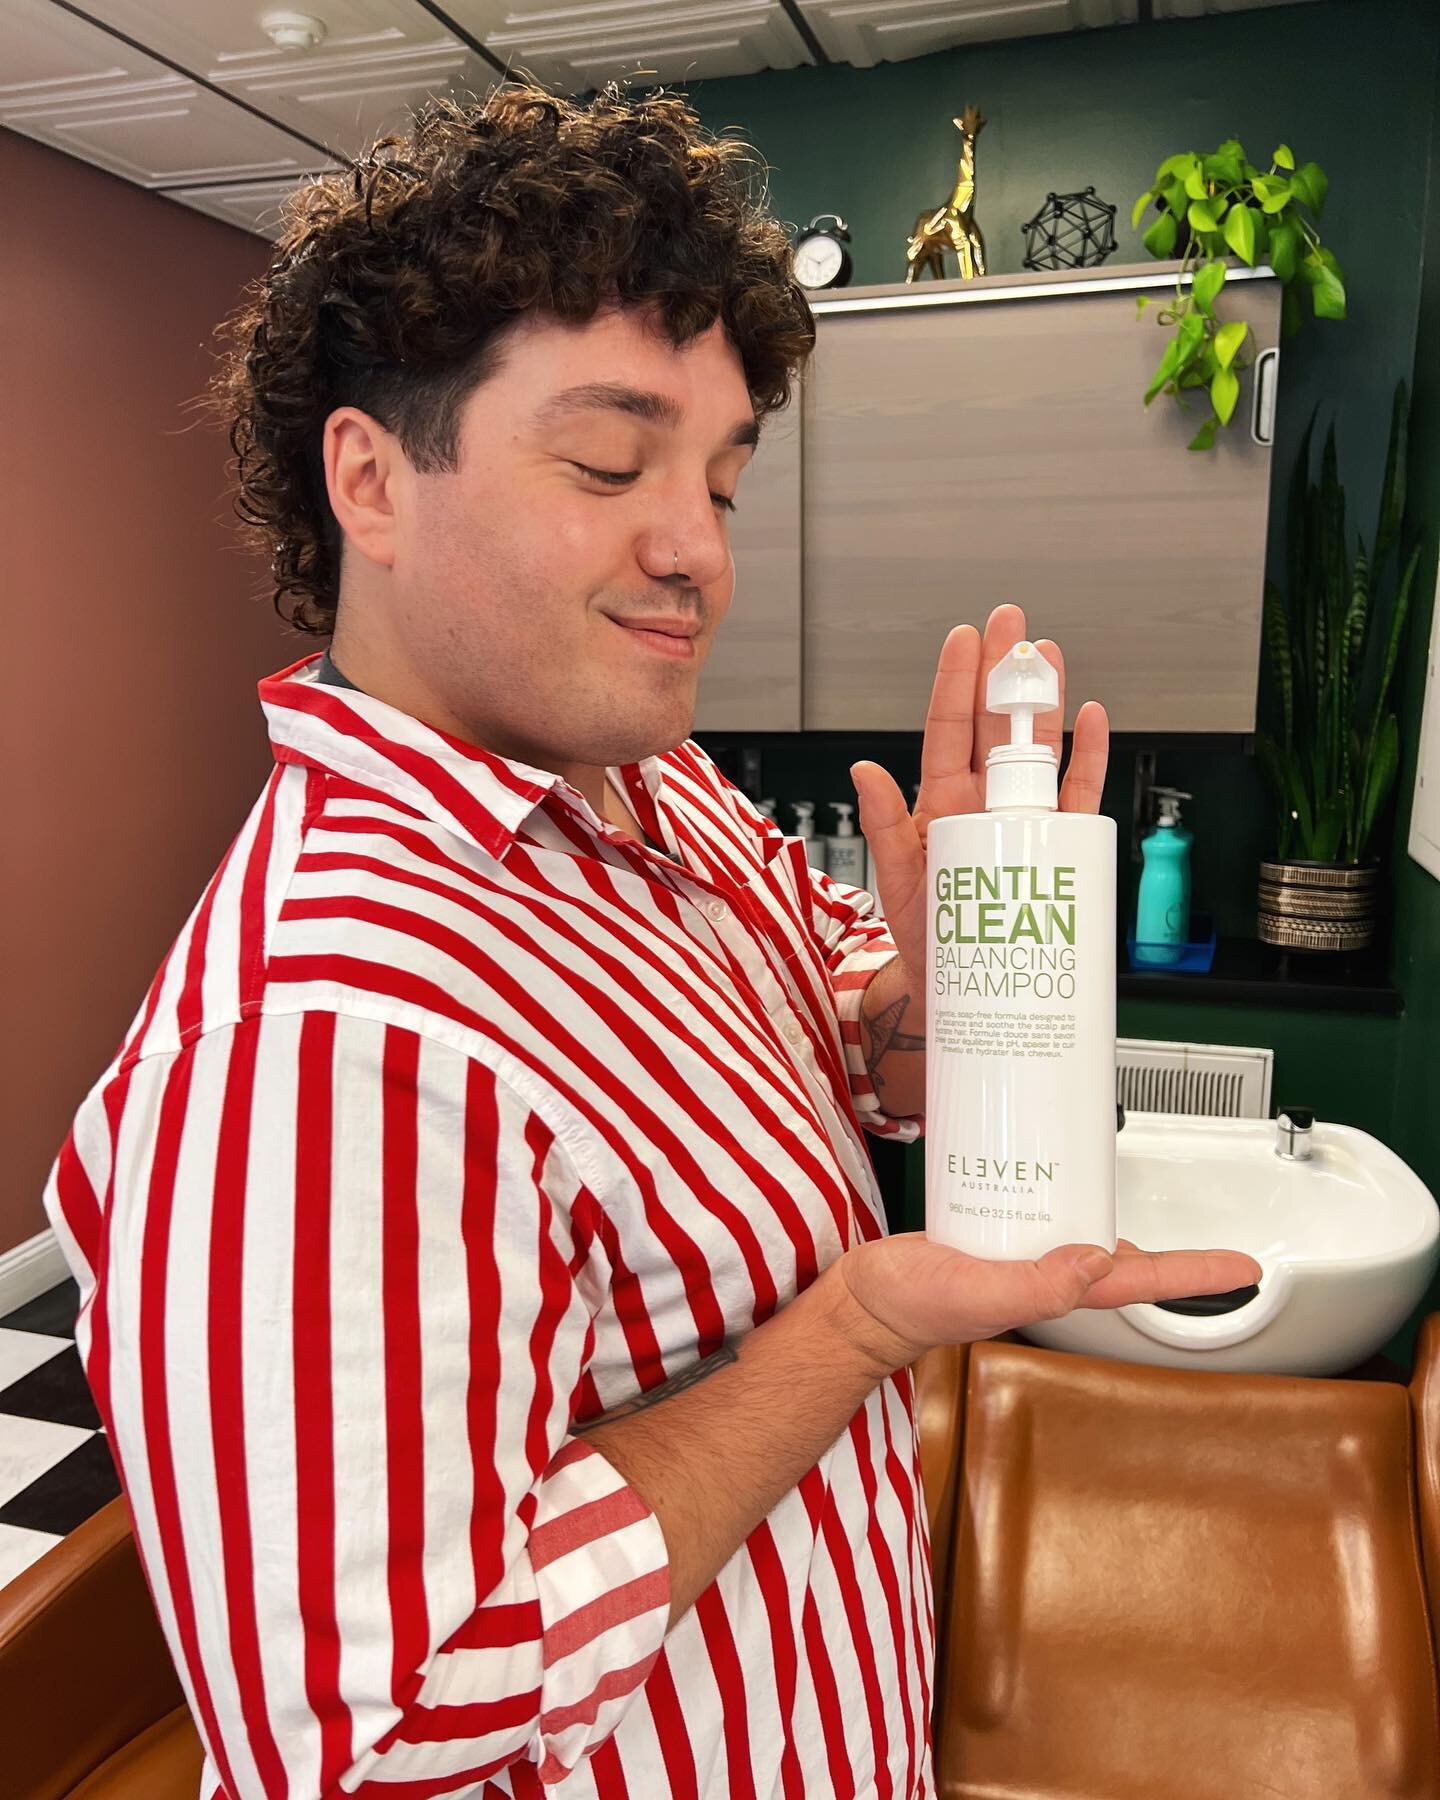 ✨Meet Jonathan&rsquo;s new fave product: Gentle Cleanse Balancing Shampoo! This product is a game-changer for so many reasons:
1️⃣ It's a pH-balancing wonder that keeps your scalp's oil production in check.
2️⃣ Ideal for frequent washers (I say max 4